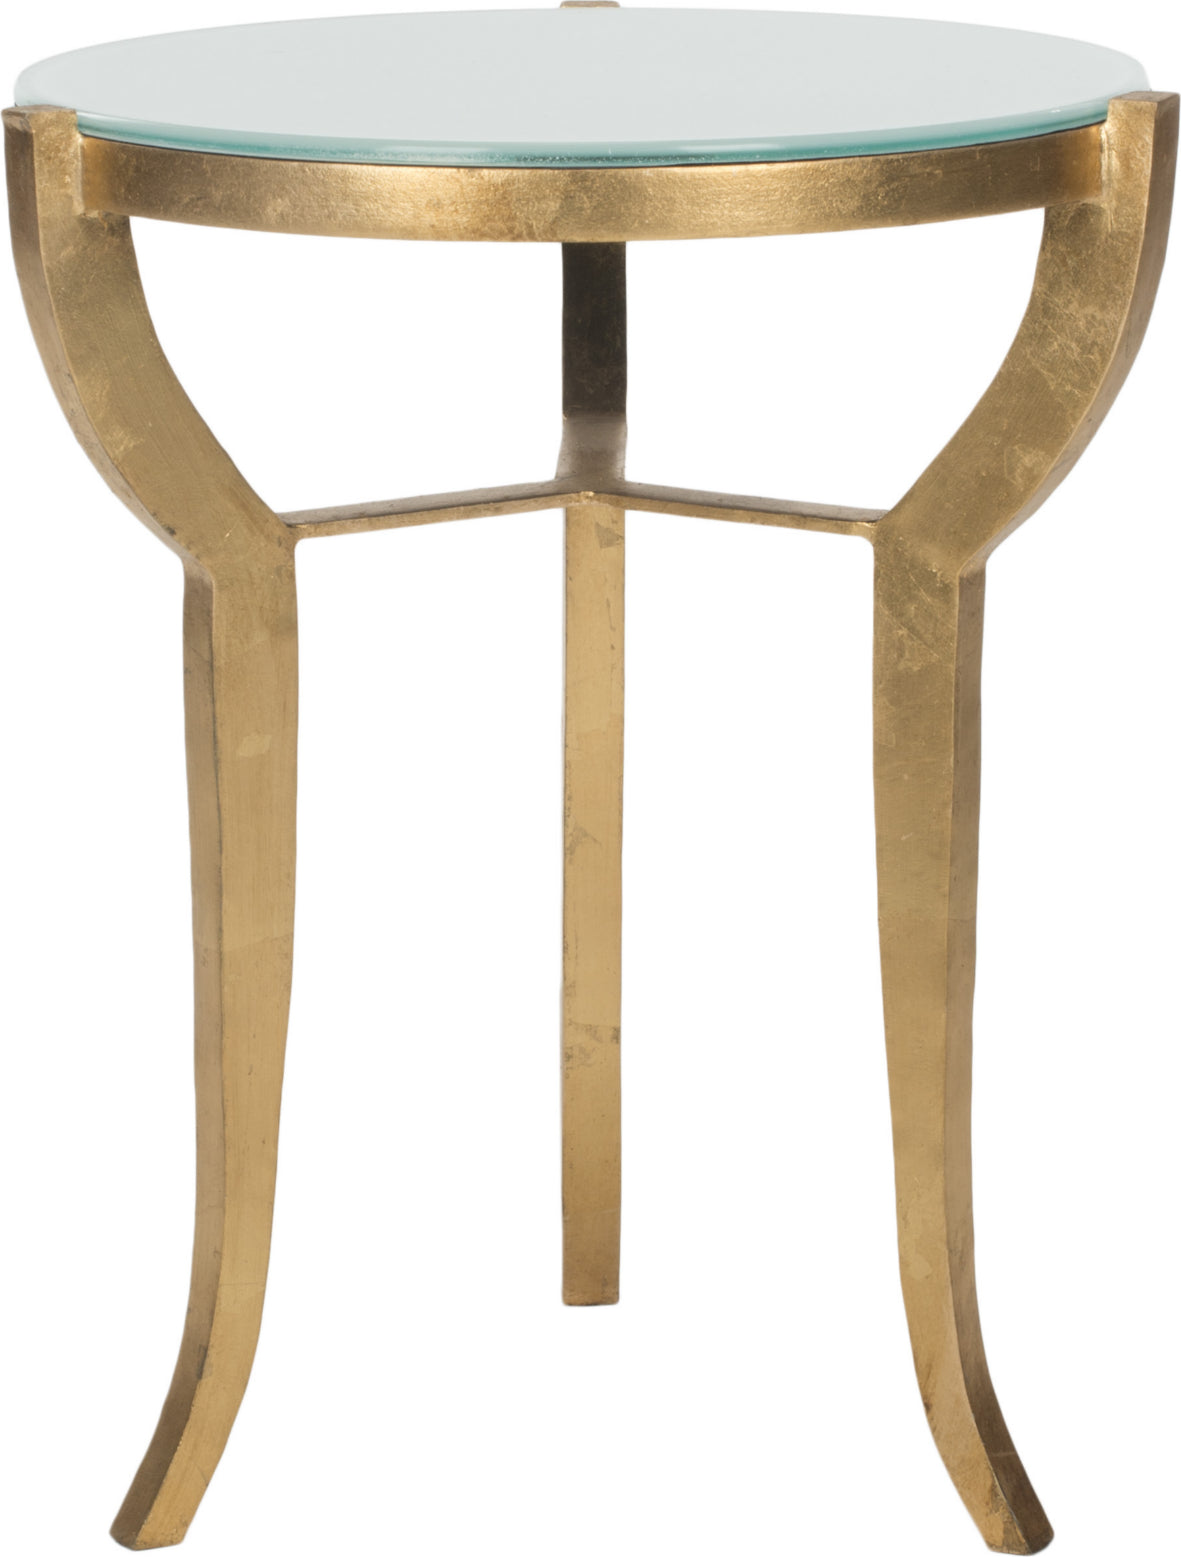 Safavieh Ormond Mirror Top Gold Leaf Accent Table and White Furniture main image